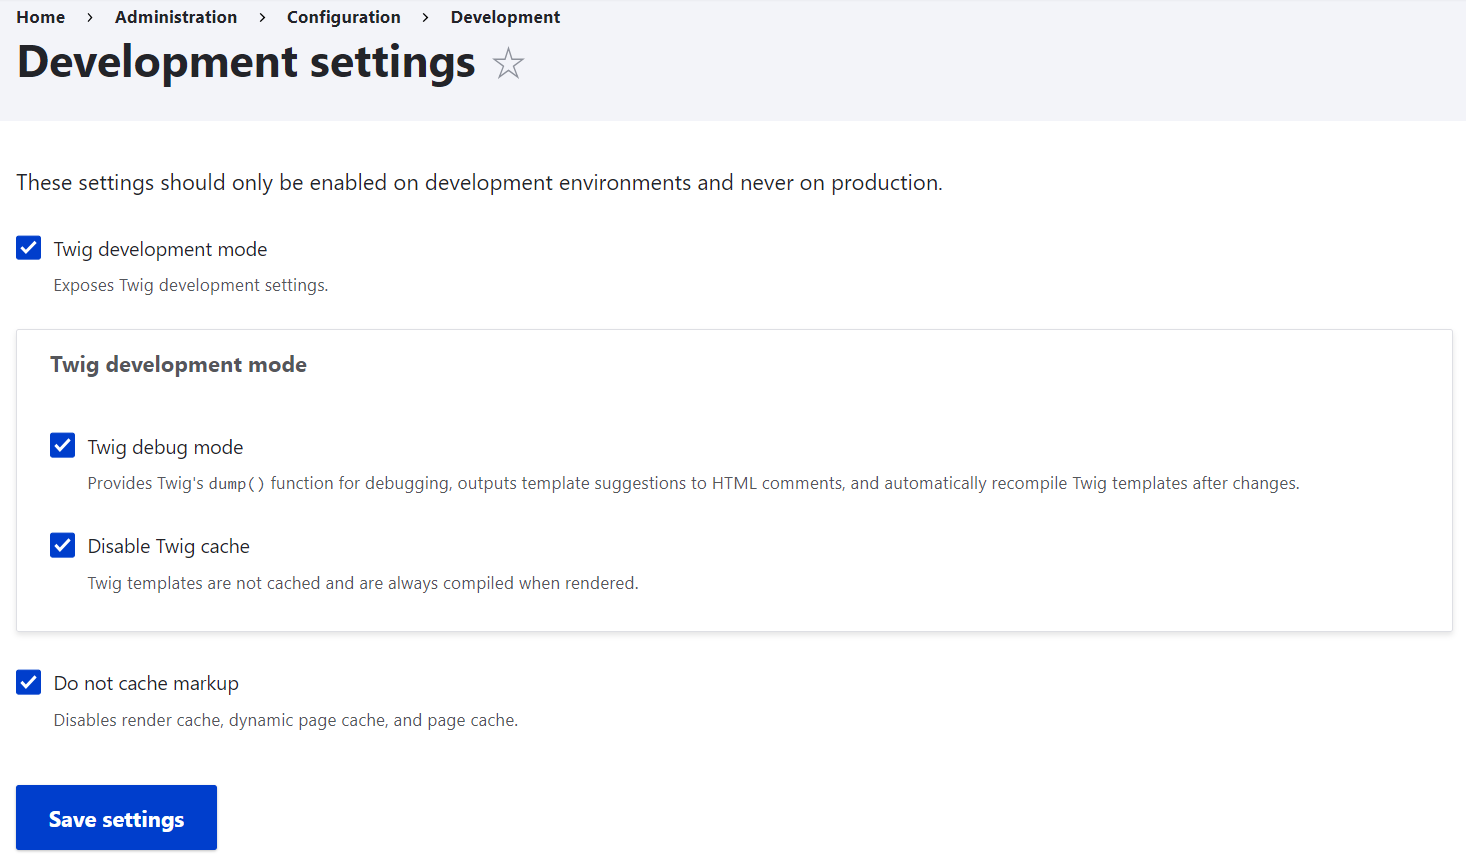 Drupal 10.1’s new Development Settings page with Twig and cache settings.